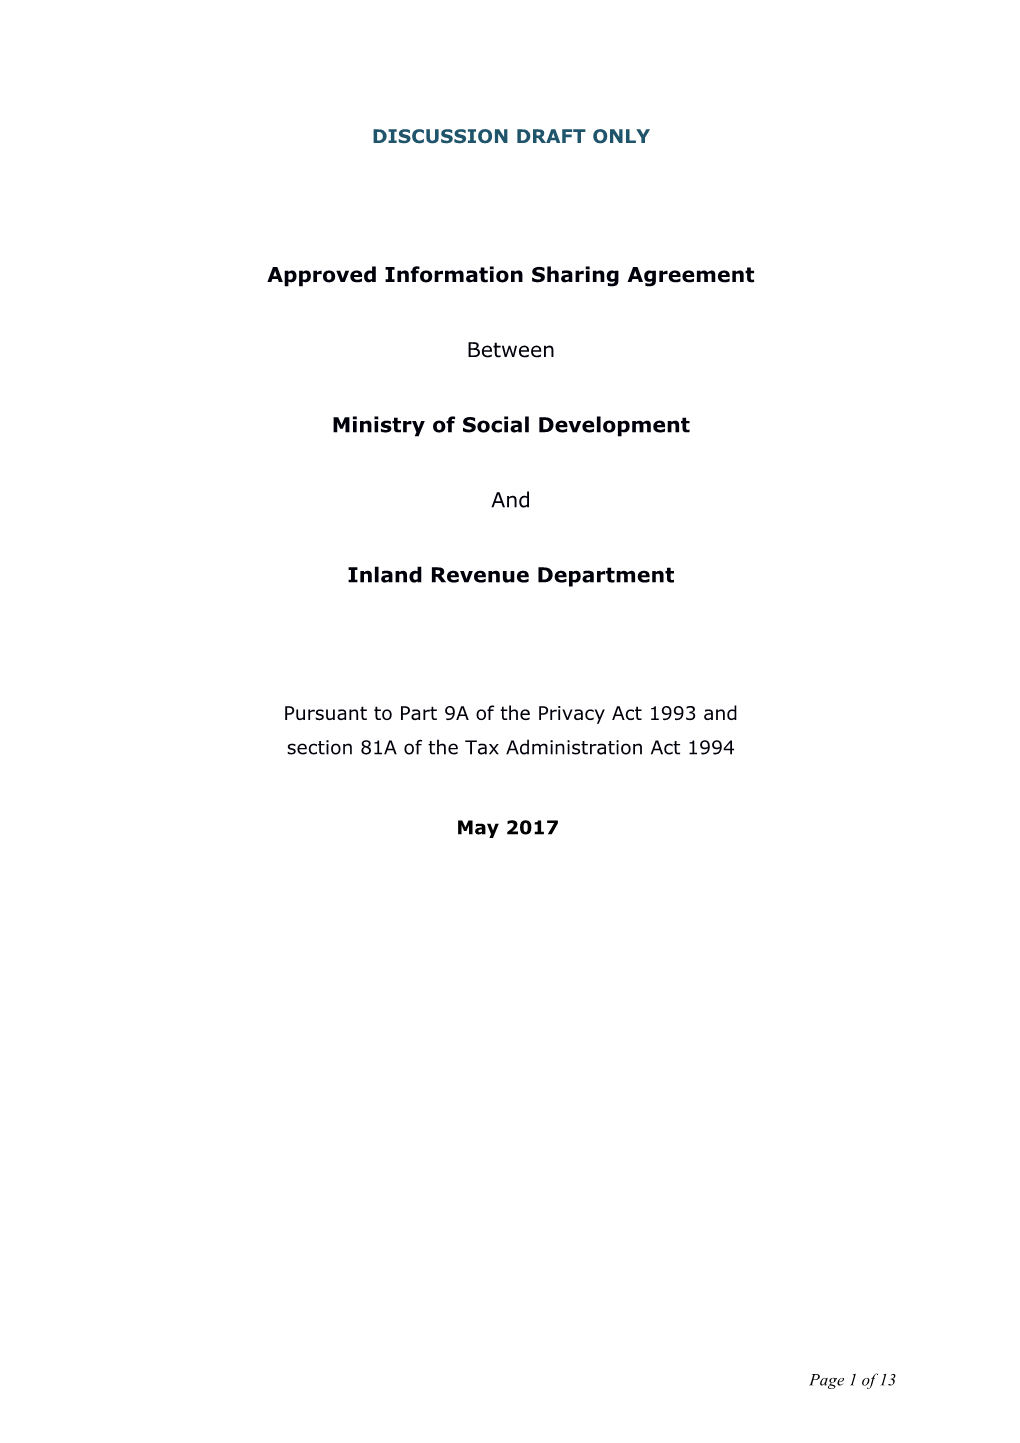 Approved Information Sharing Agreement Between Ministry of Social Development and Inland